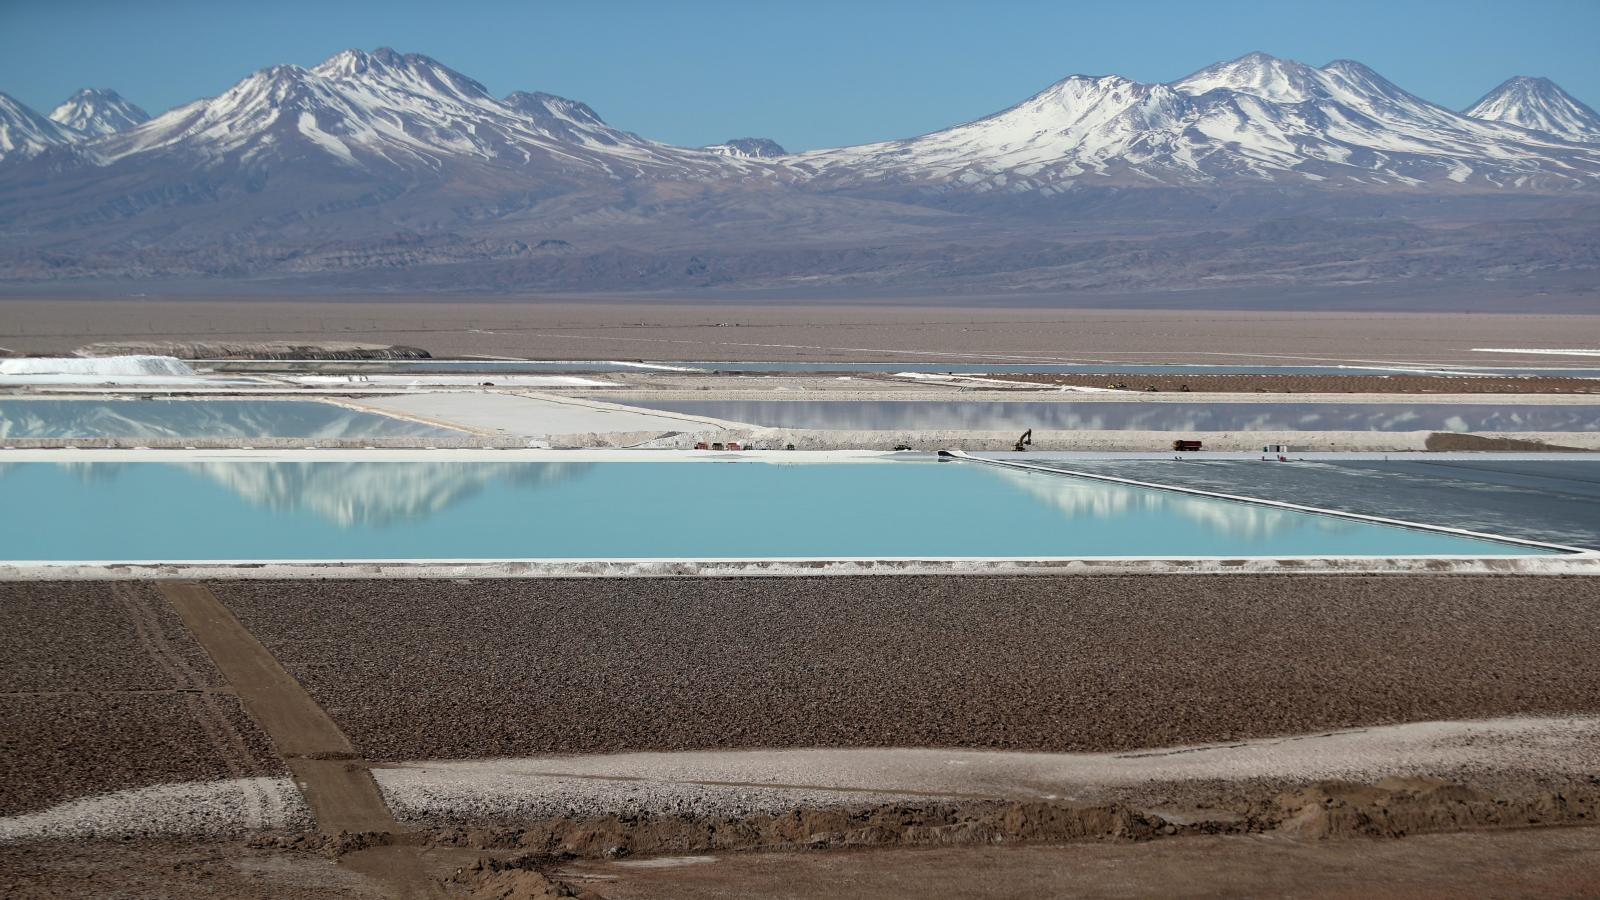 Chile’s new constitution could rewrite the story of lithium mining